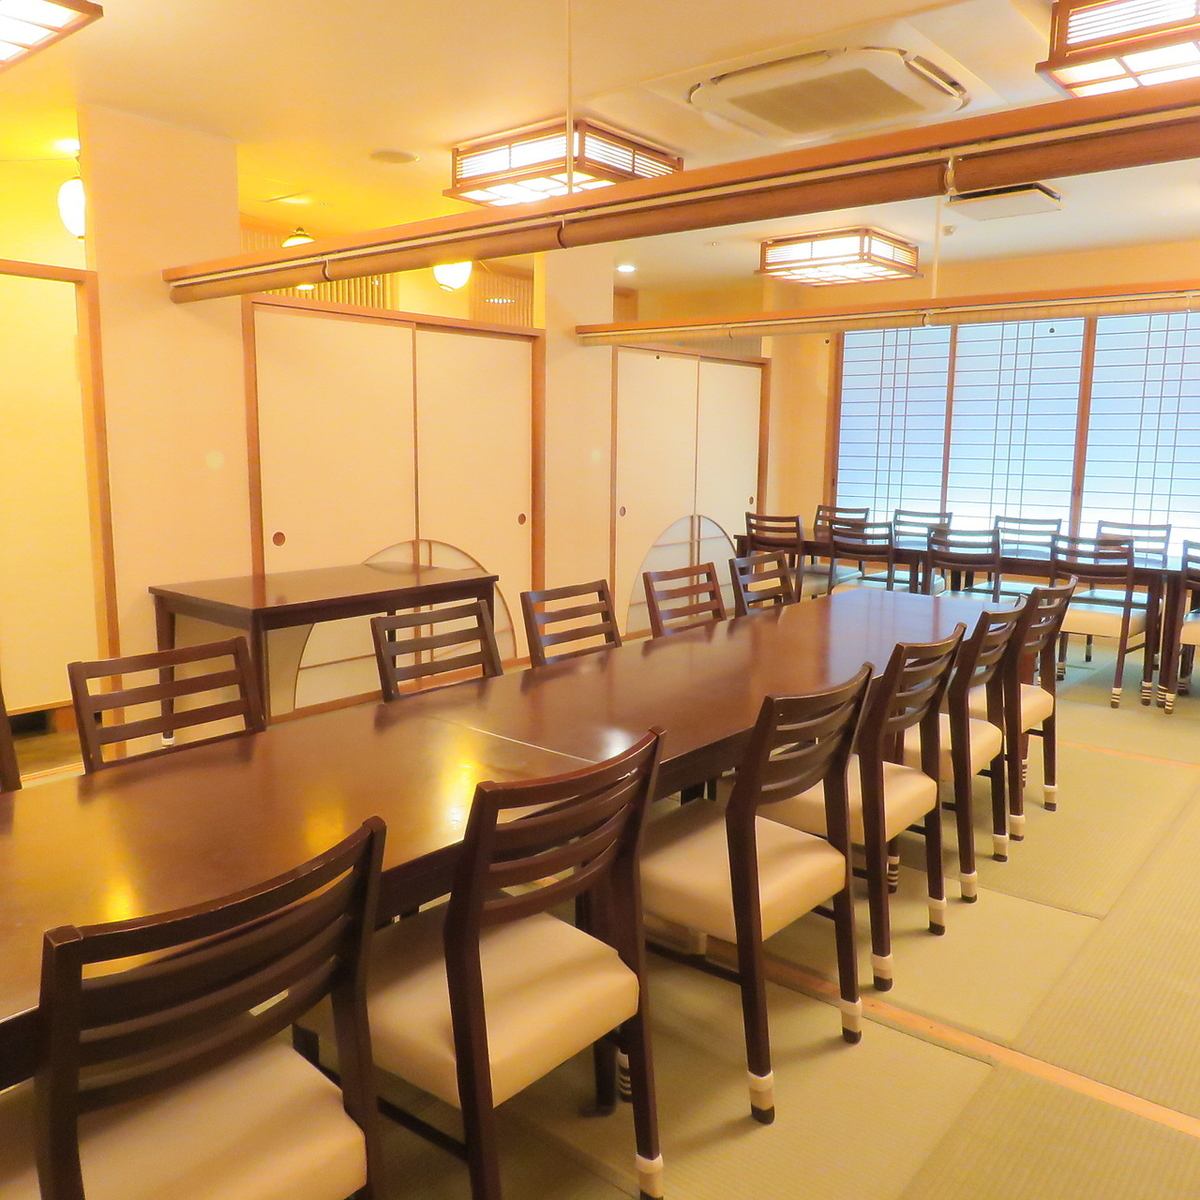 If you're looking for a spacious tatami room, this is the place!